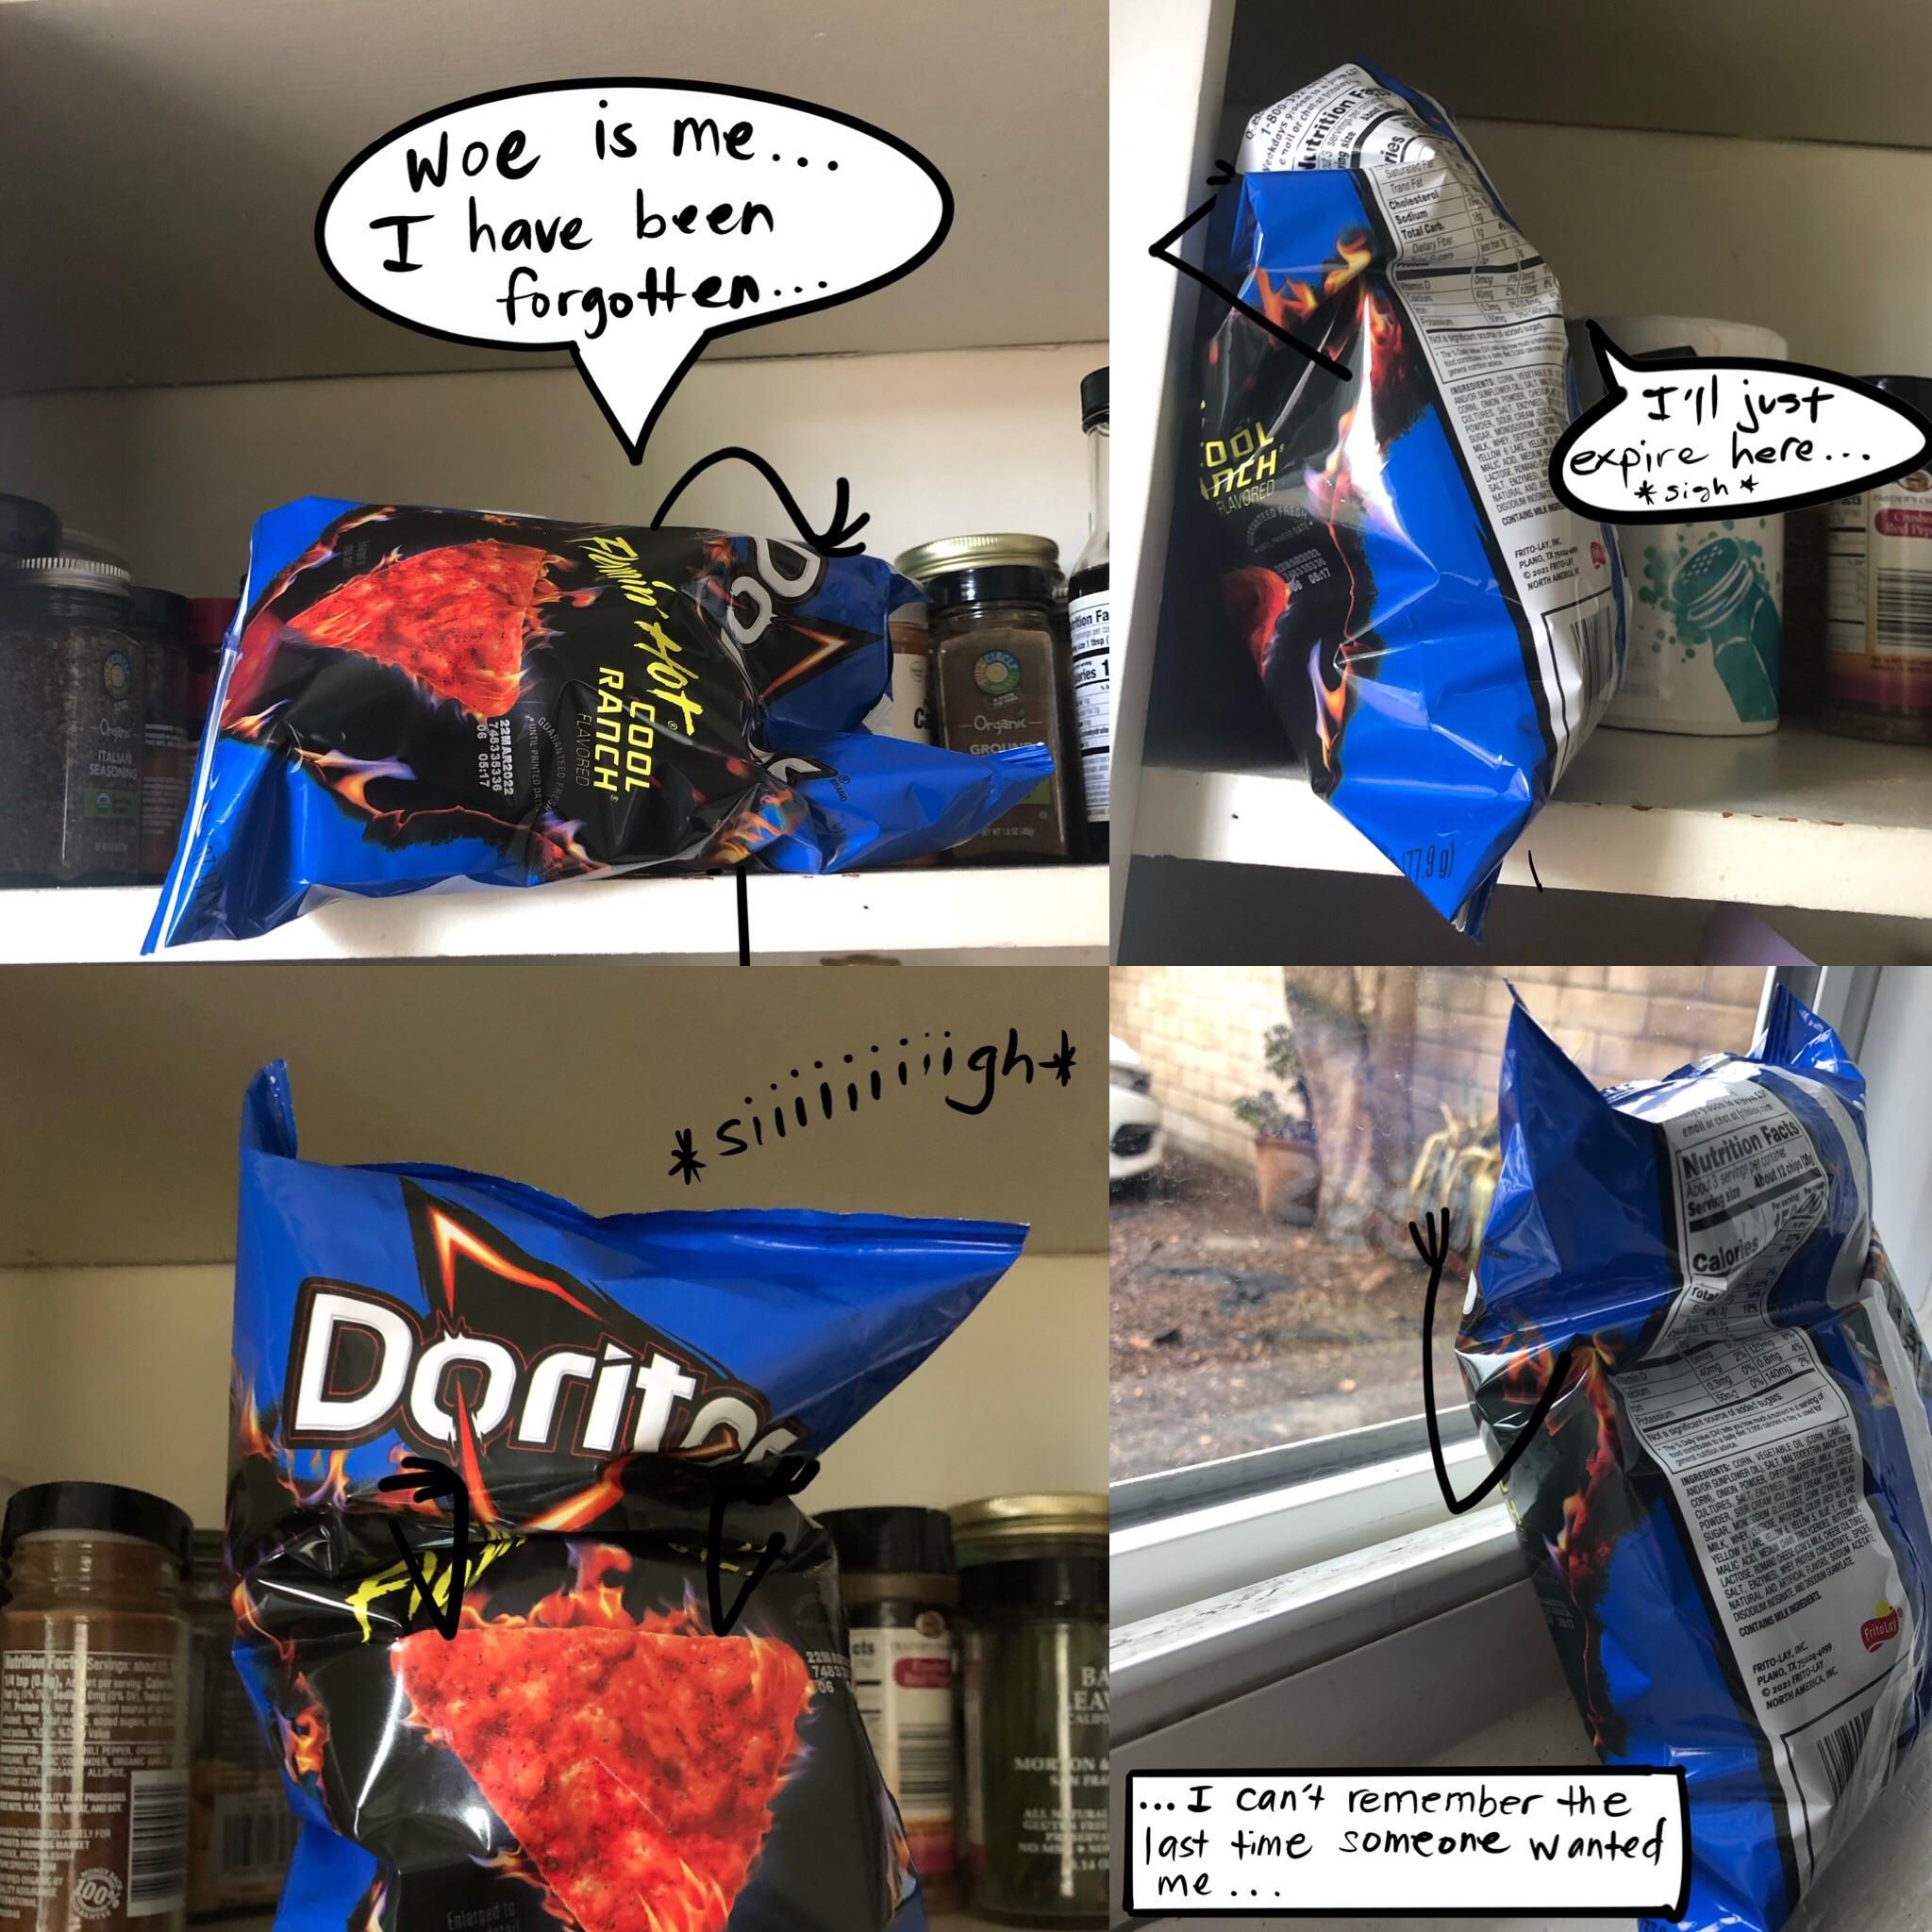 My friend forgot his chips at my place and I’m not into them. I’ve been sending him images like these every few days.